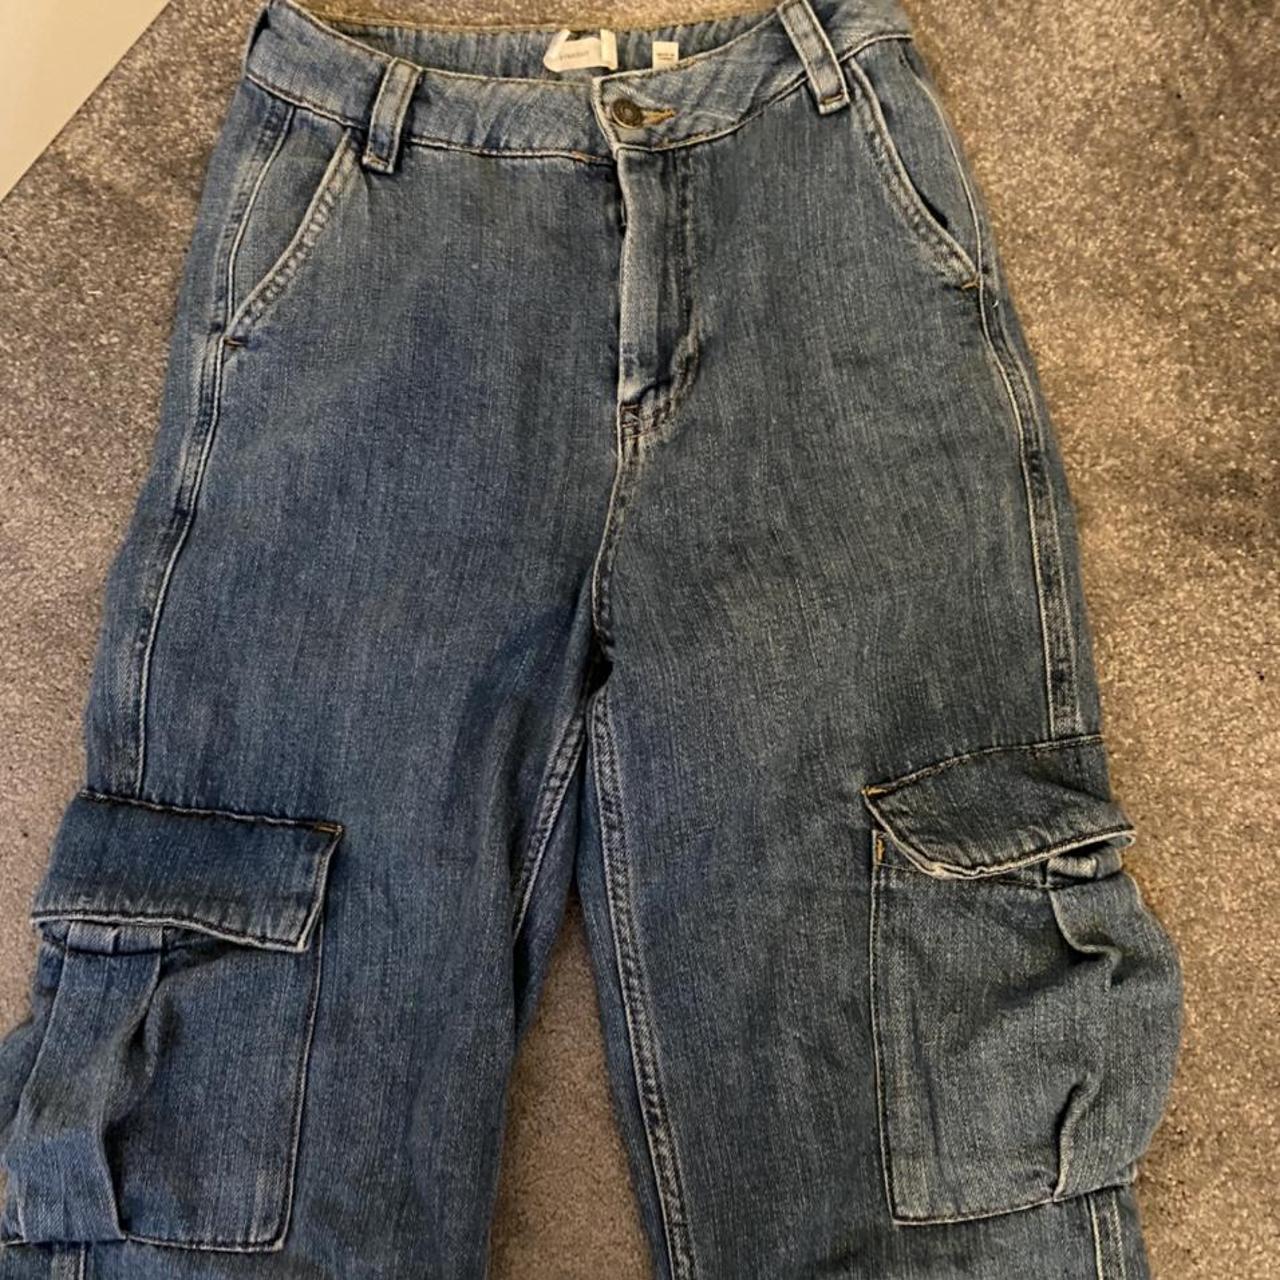 Subdued cargo jeans Tag says waist 24 but too big on... - Depop